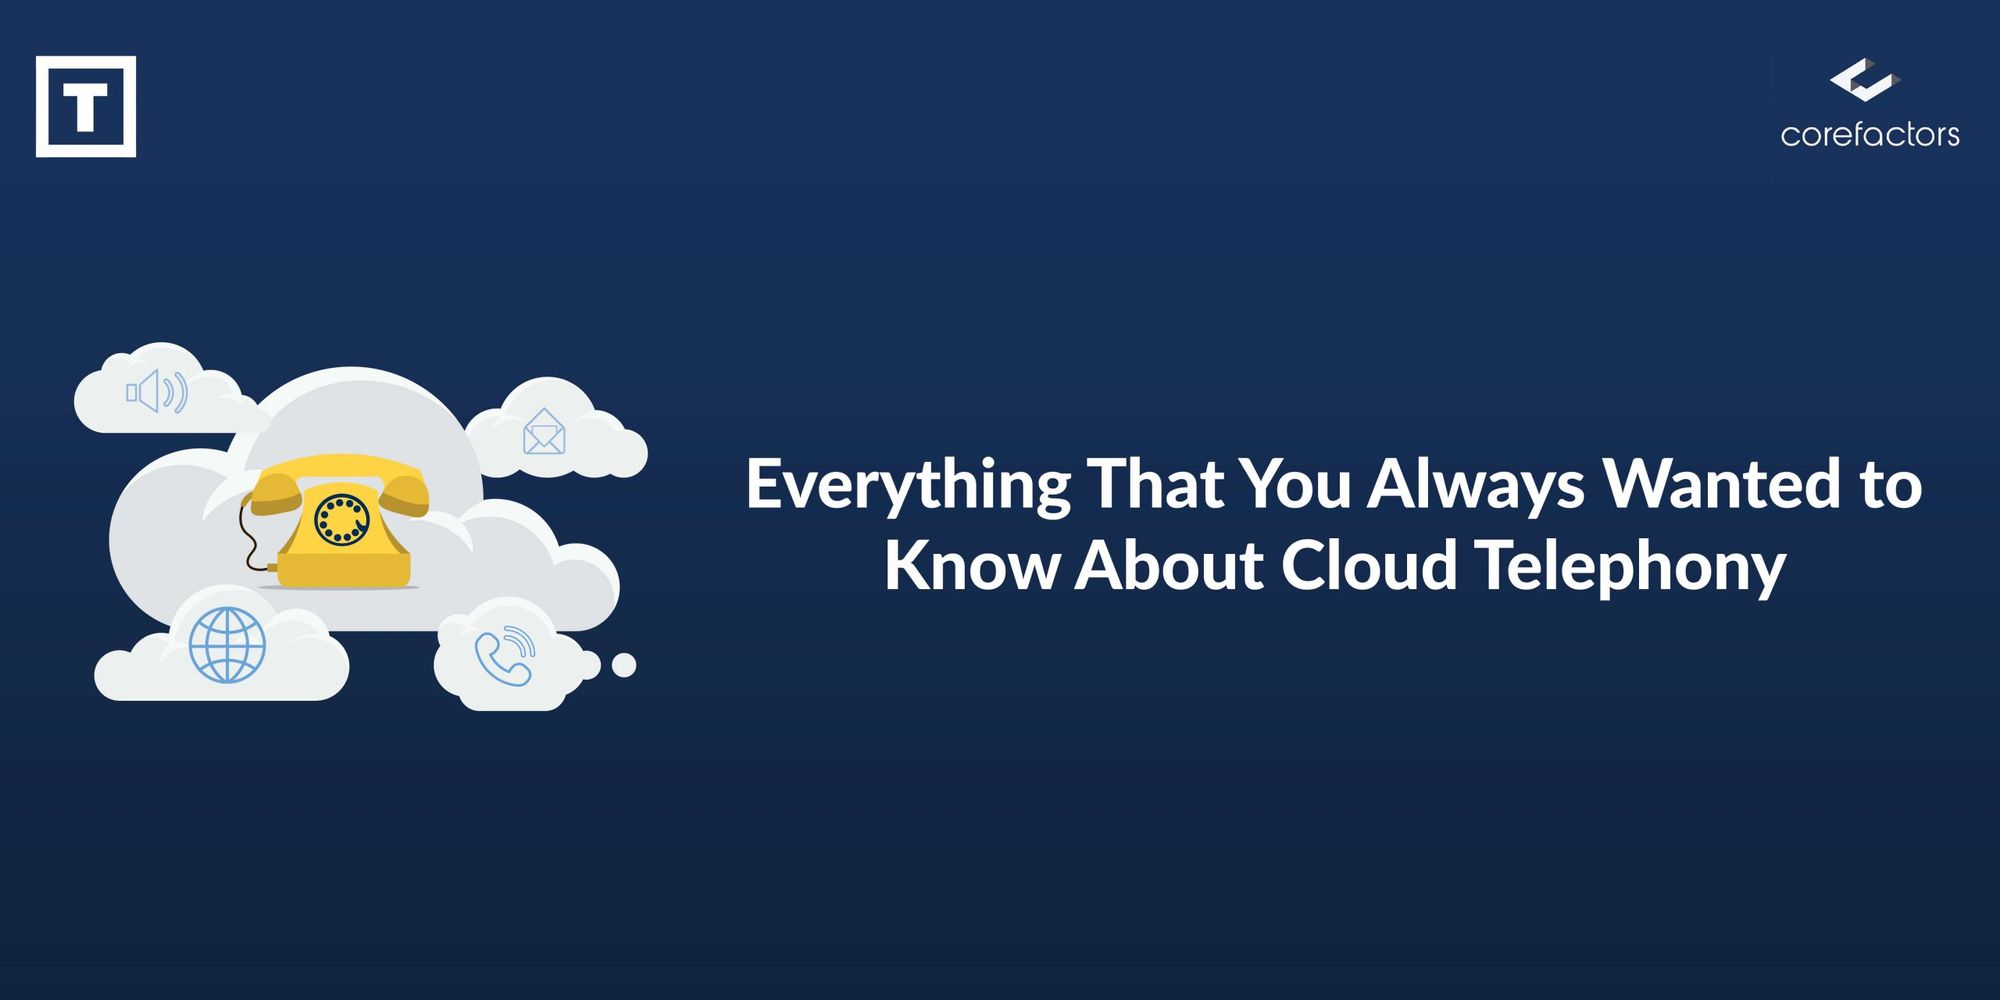 Everything That You Always Wanted to Know About Cloud Telephony